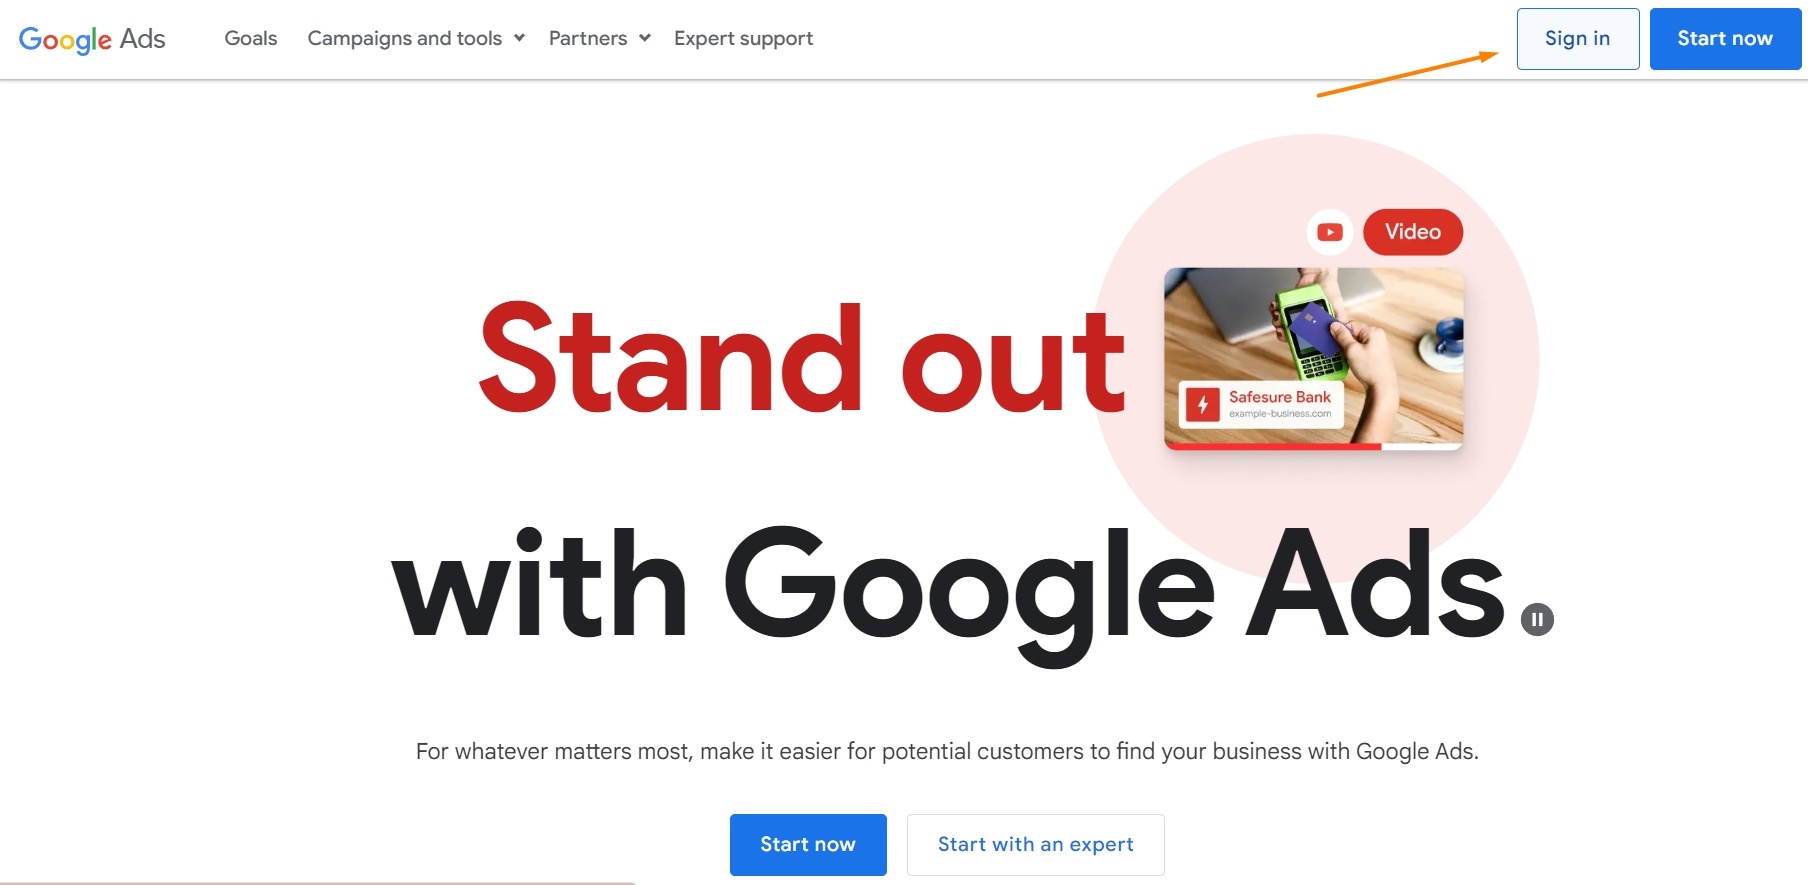 Google ads account sign-in homepage